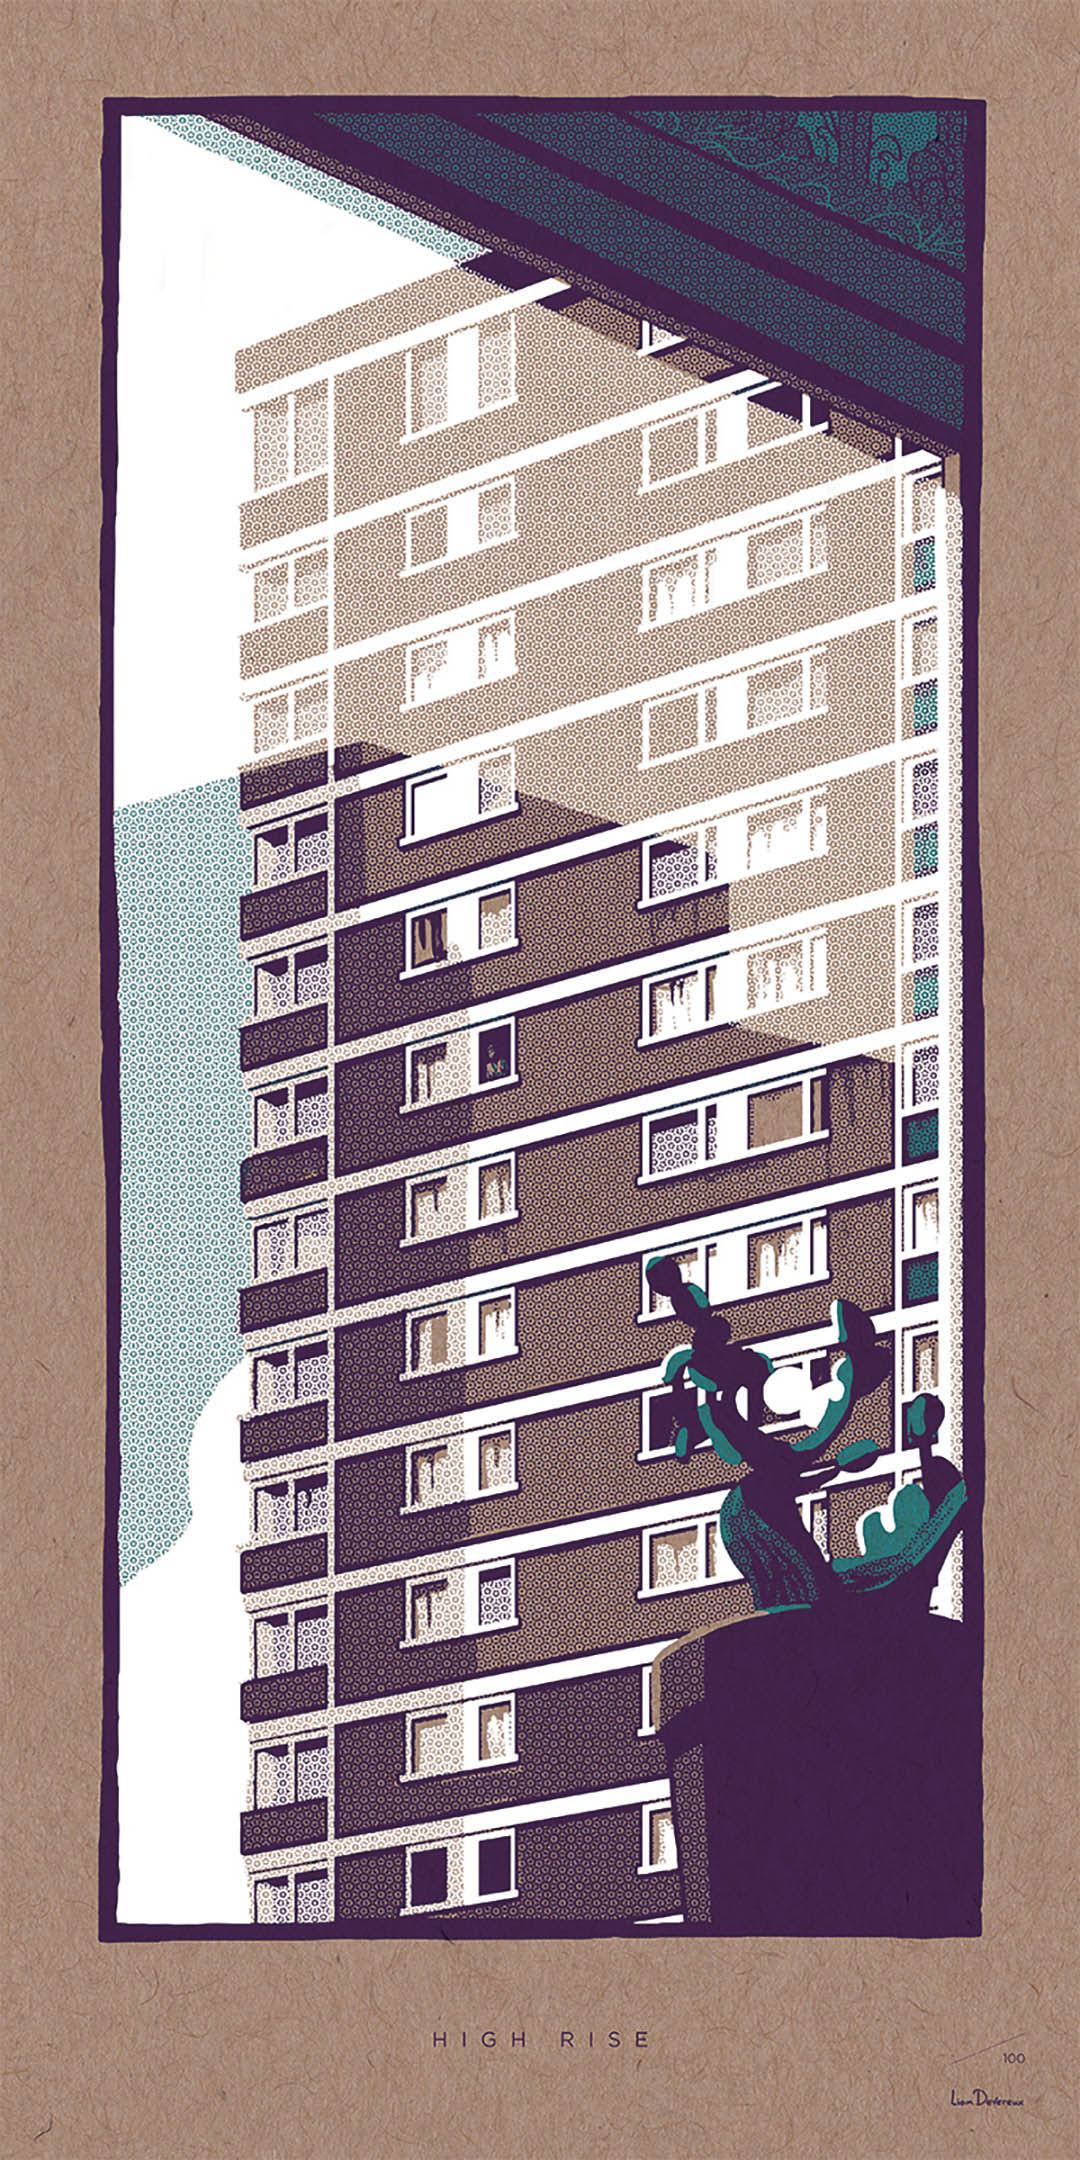 High Rise - Liam Devereux. 30x60mm Giclee print printed on 450mic recycled Kraft card